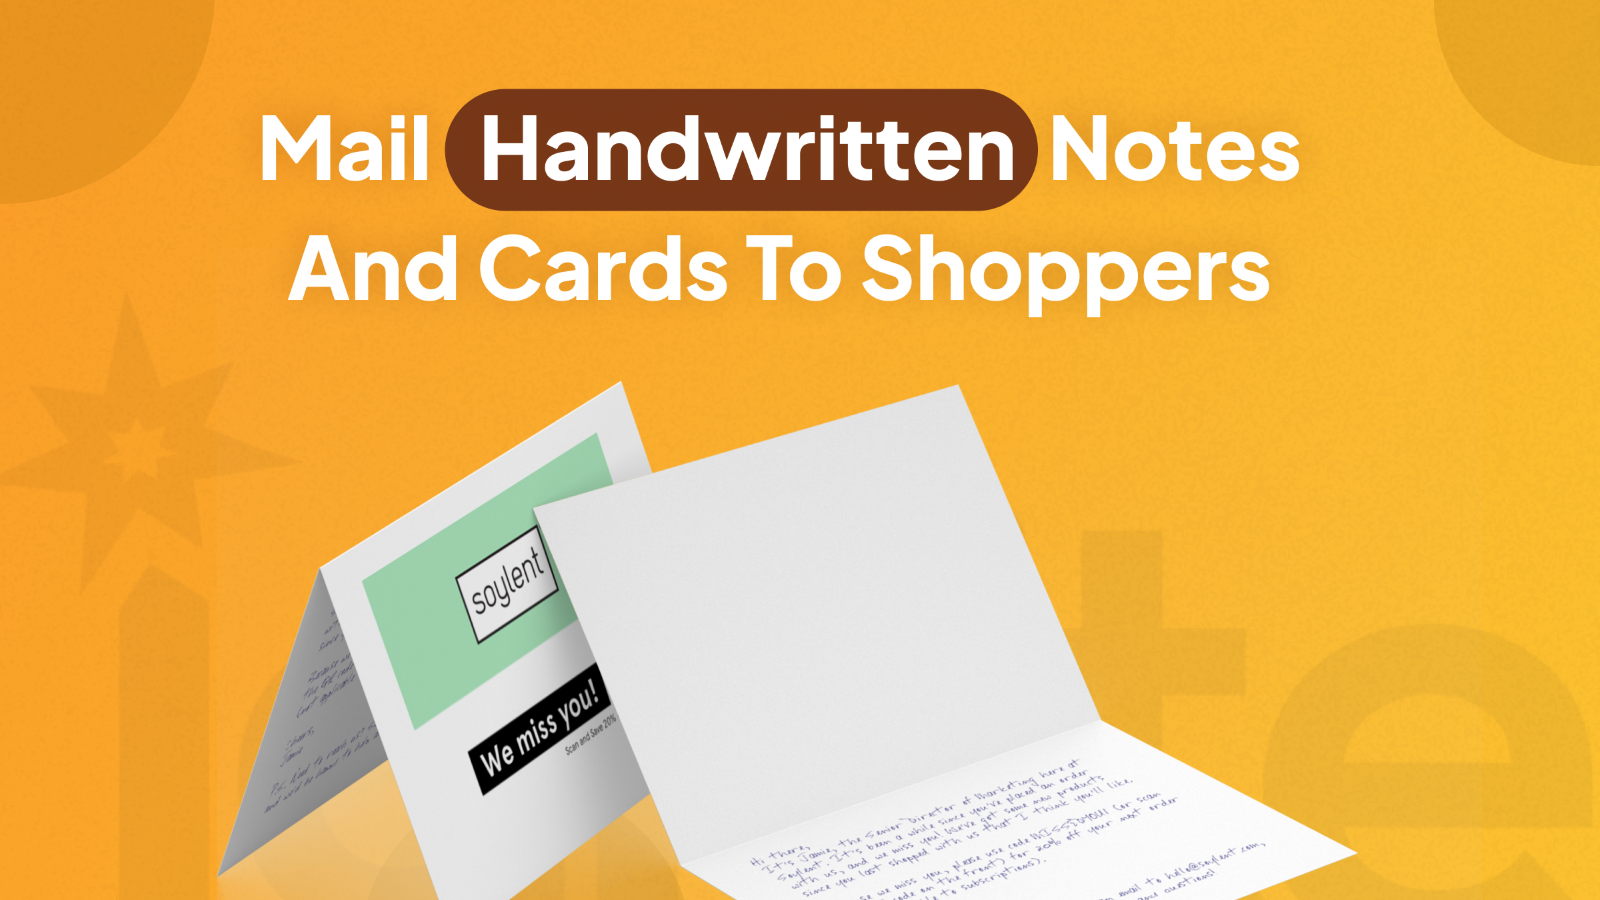 IgnitePOST - Send Handwritten Cards & Notes by Direct Mail